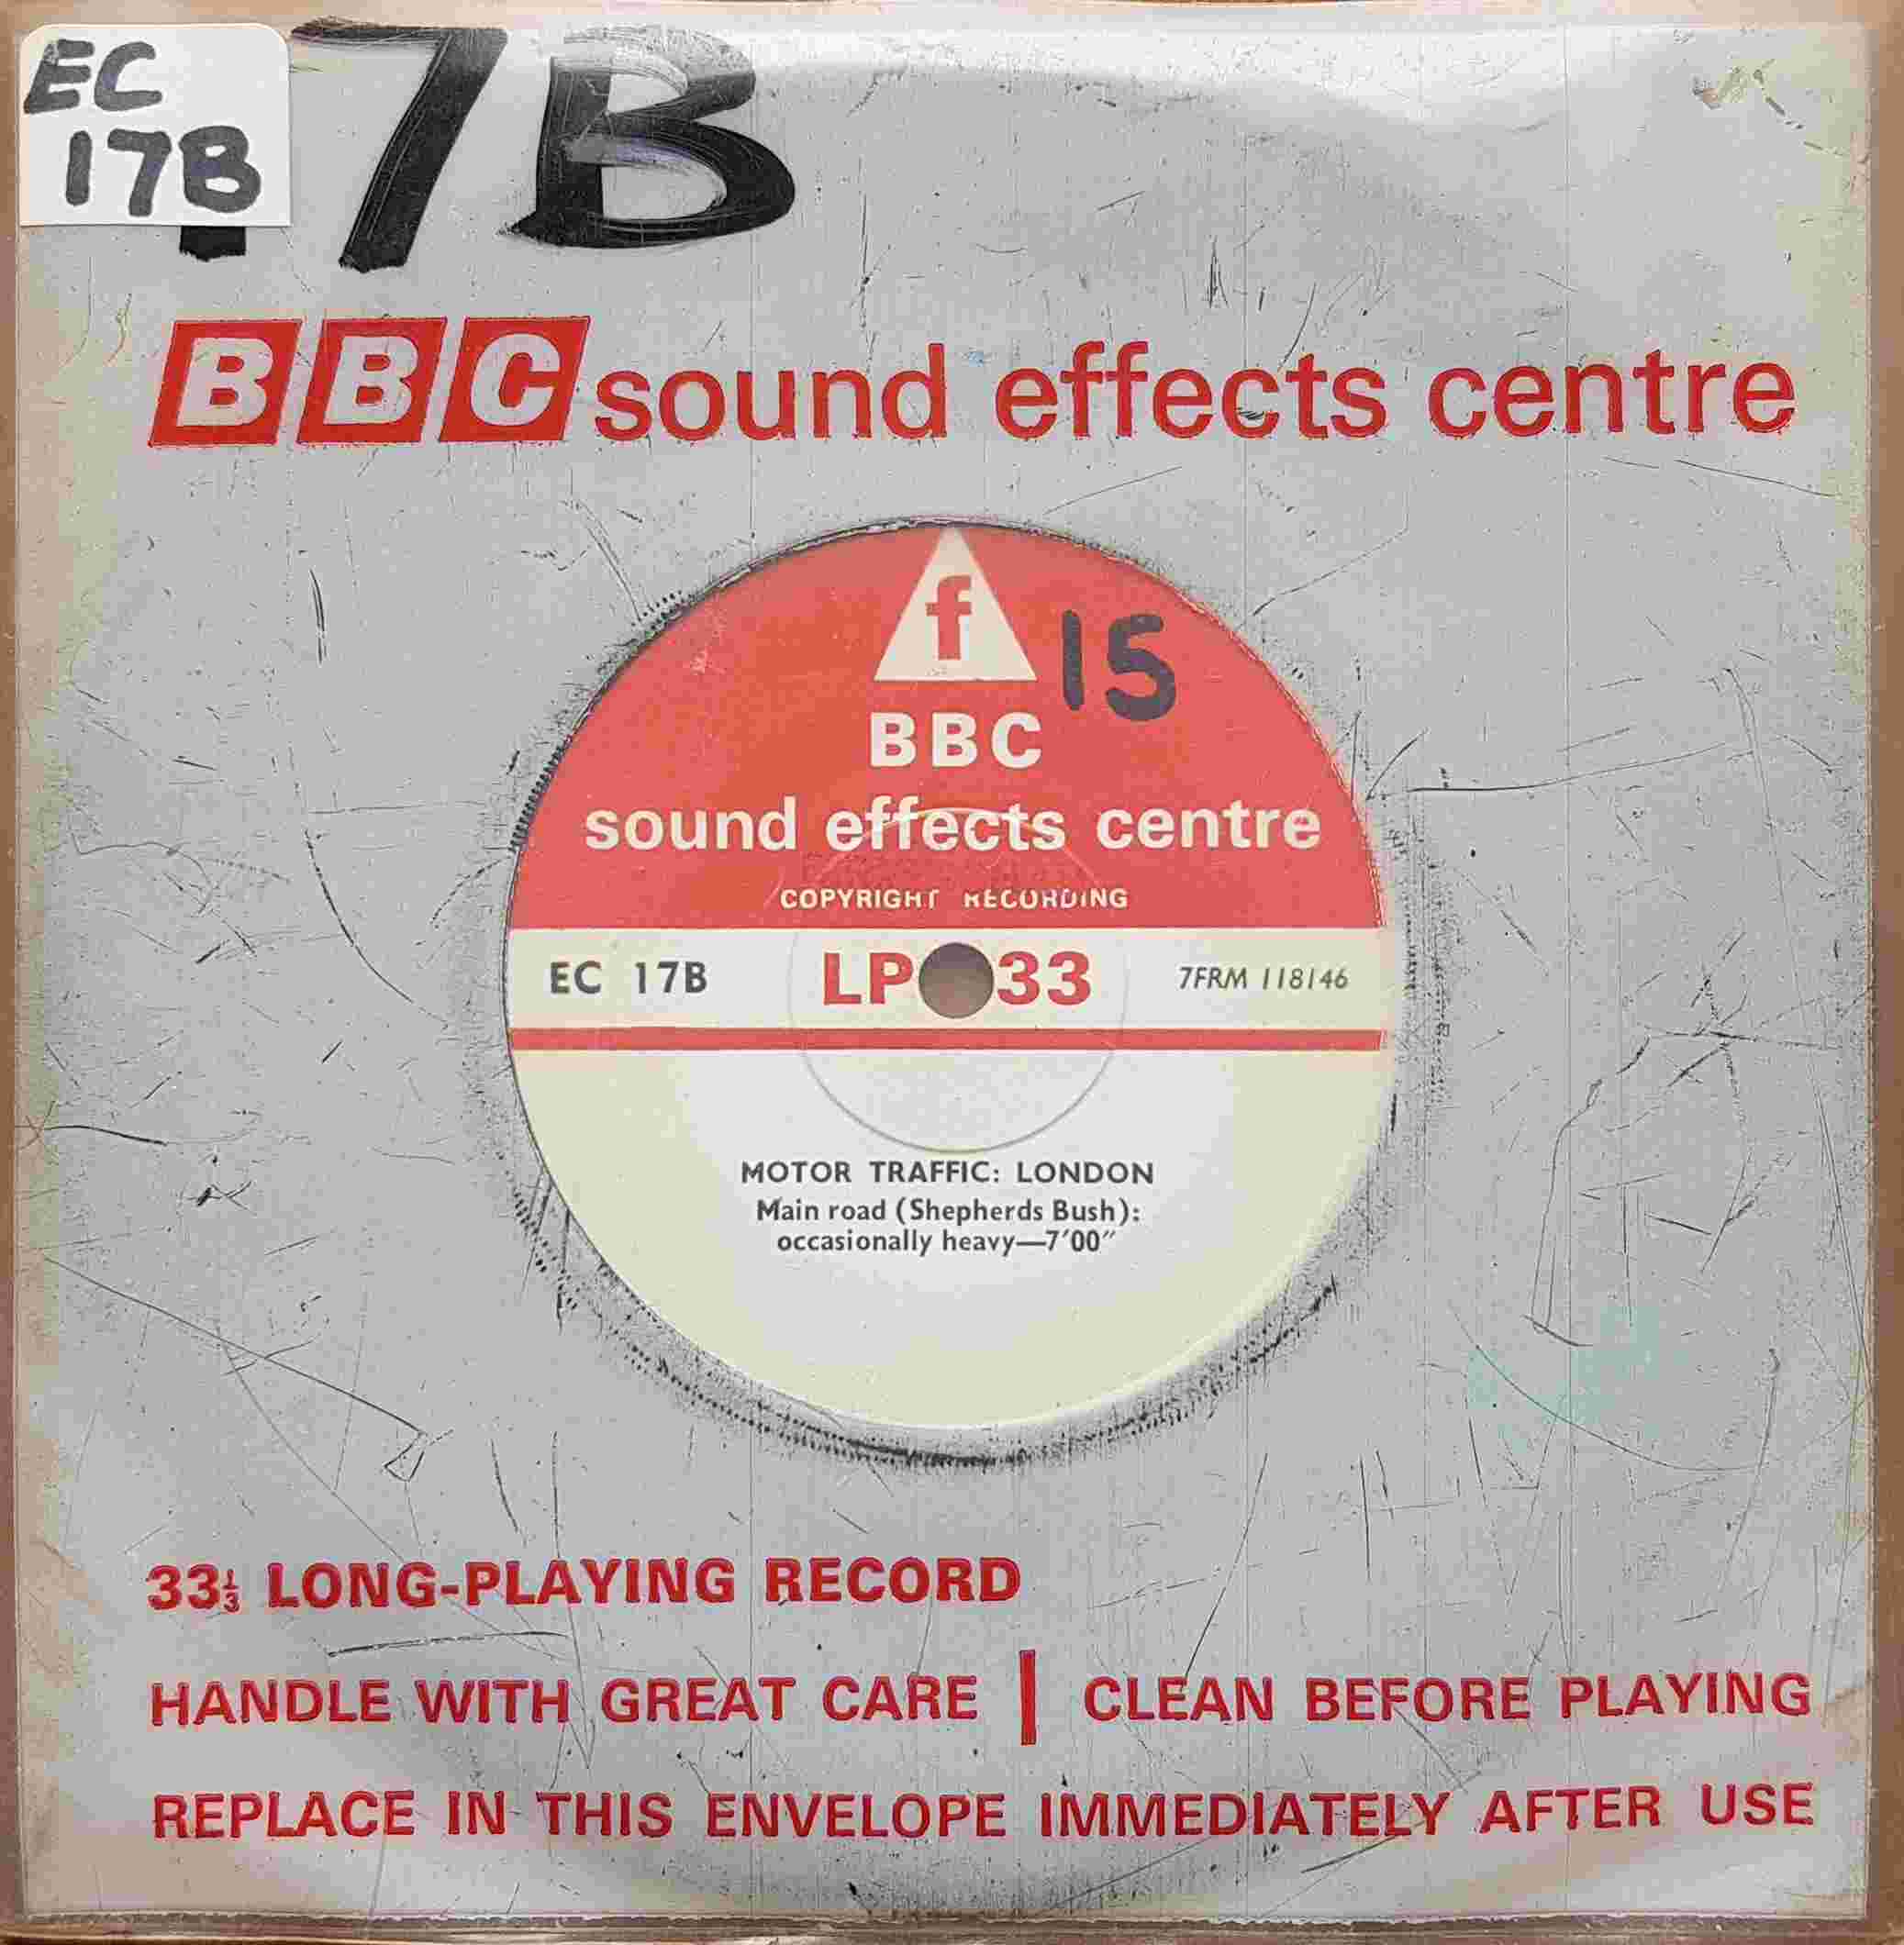 Picture of EC 17B Motor traffic: London by artist Not registered from the BBC singles - Records and Tapes library